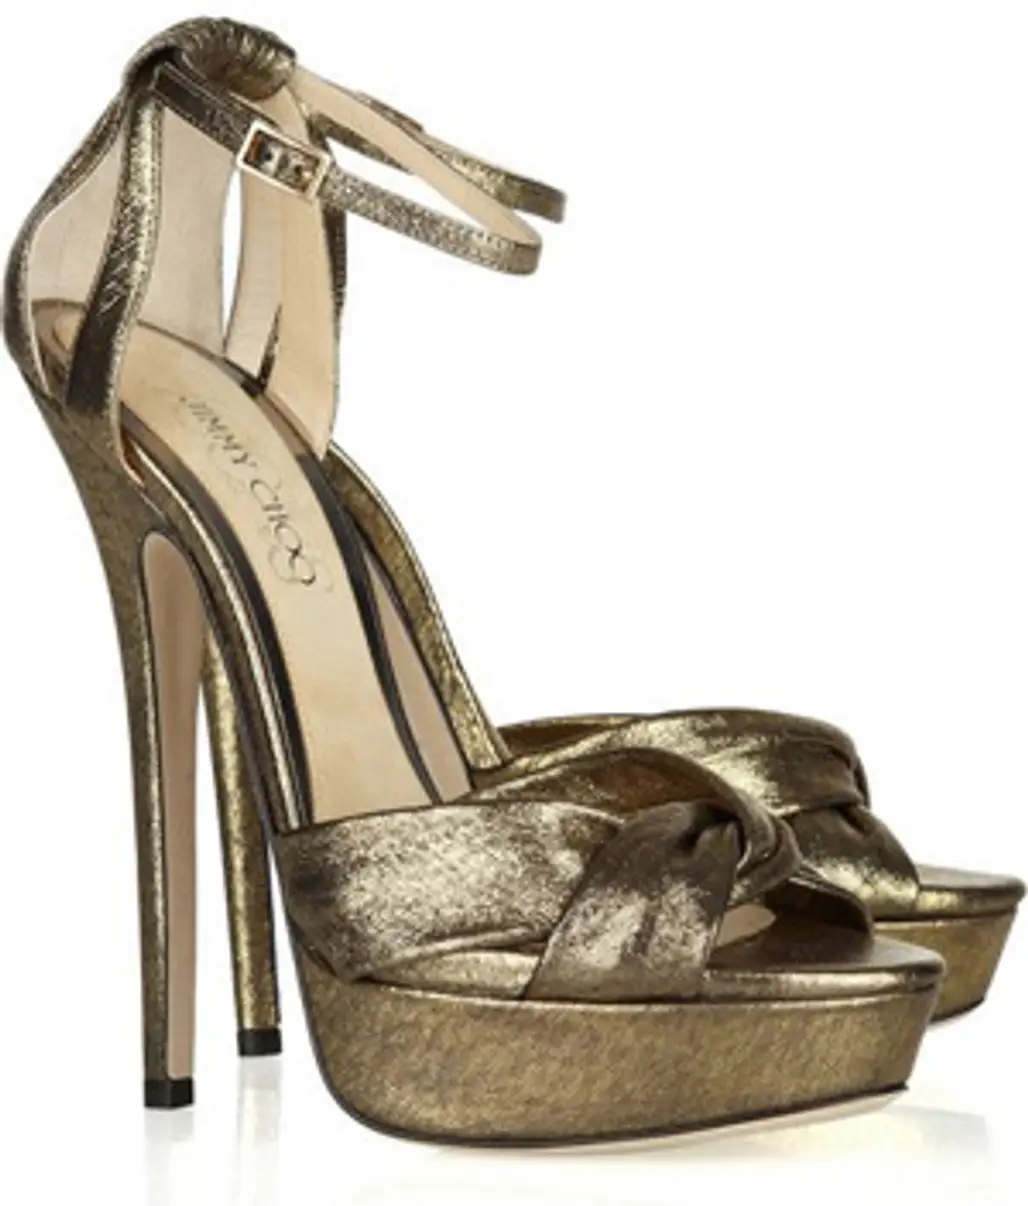 Jimmy Choo Lamé Covered Sandals